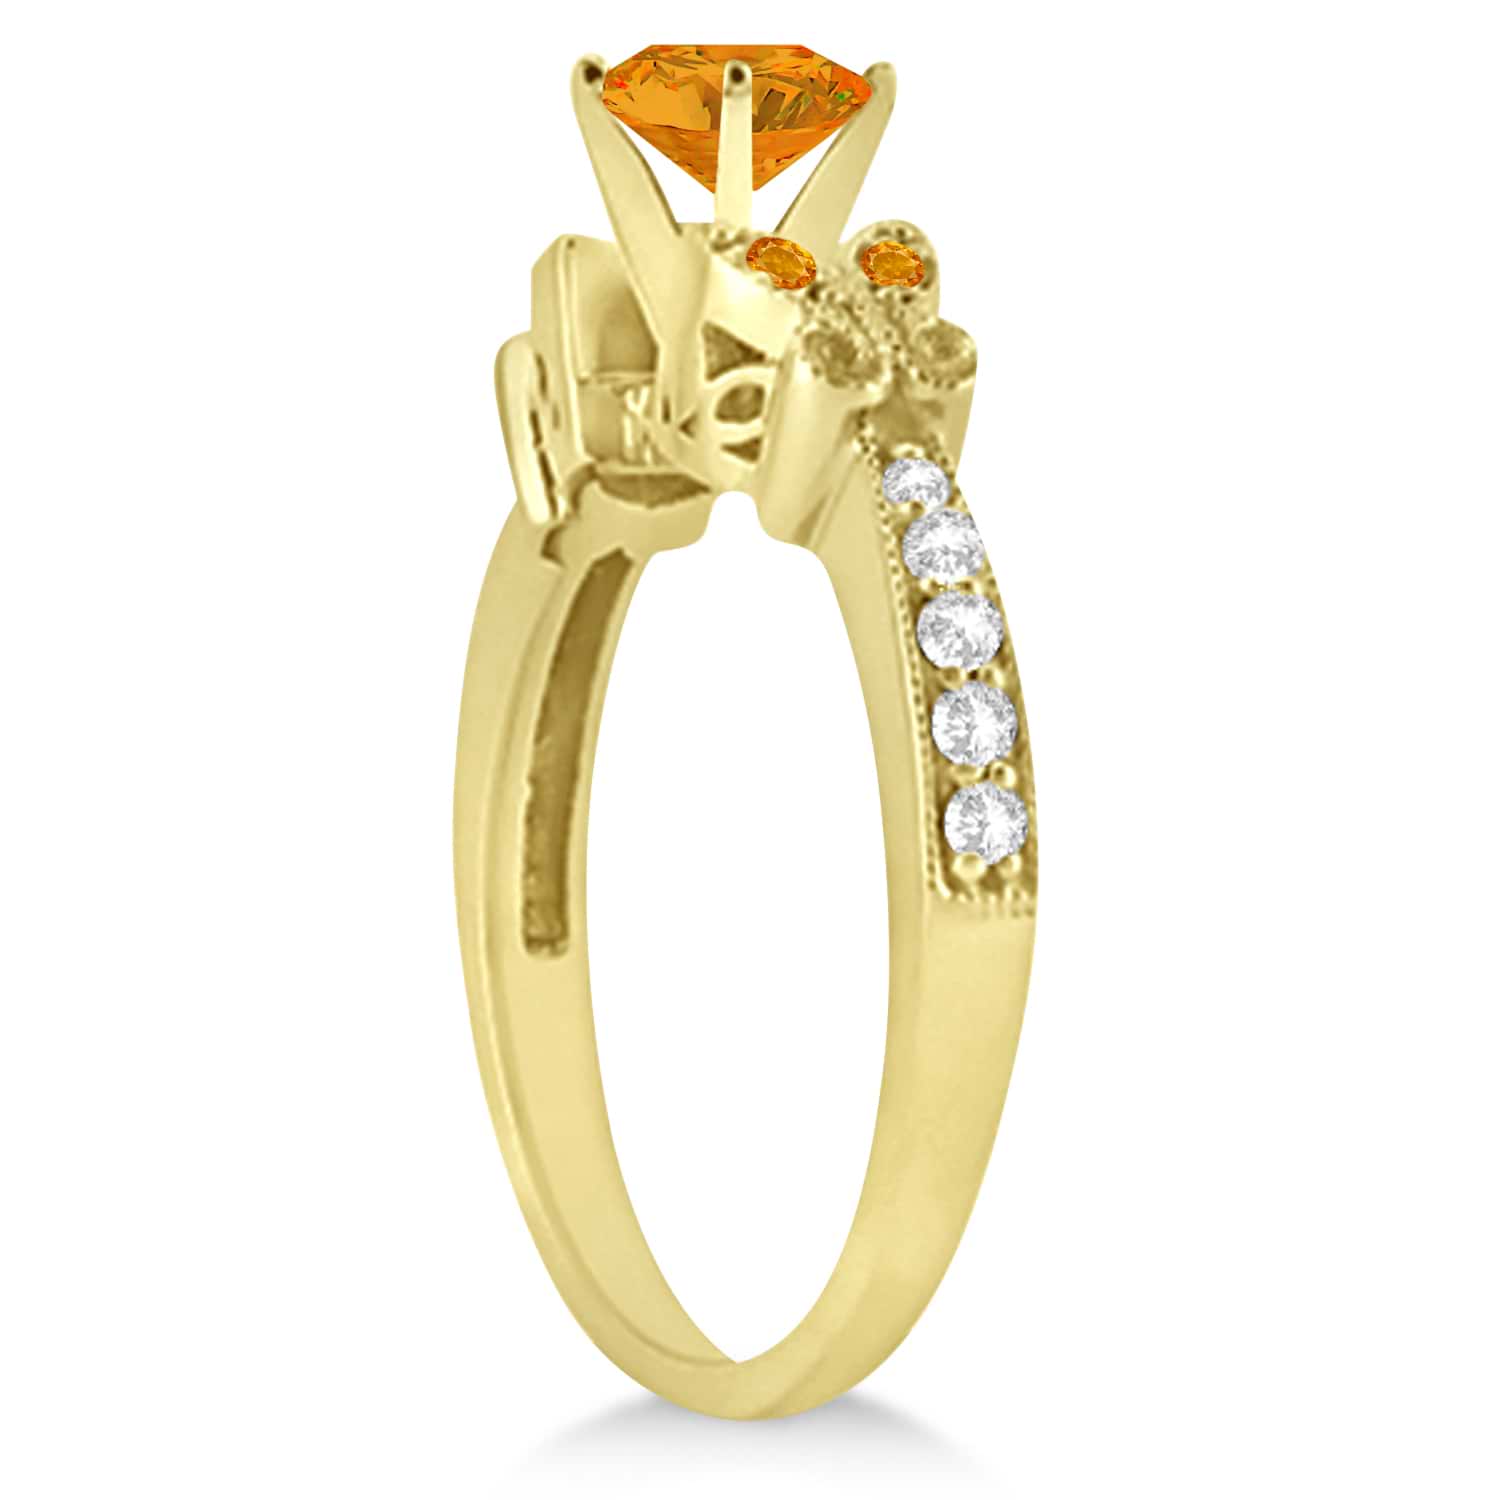 Butterfly Genuine Citrine & Diamond Engagement Ring 14K Yellow Gold 1.28ct